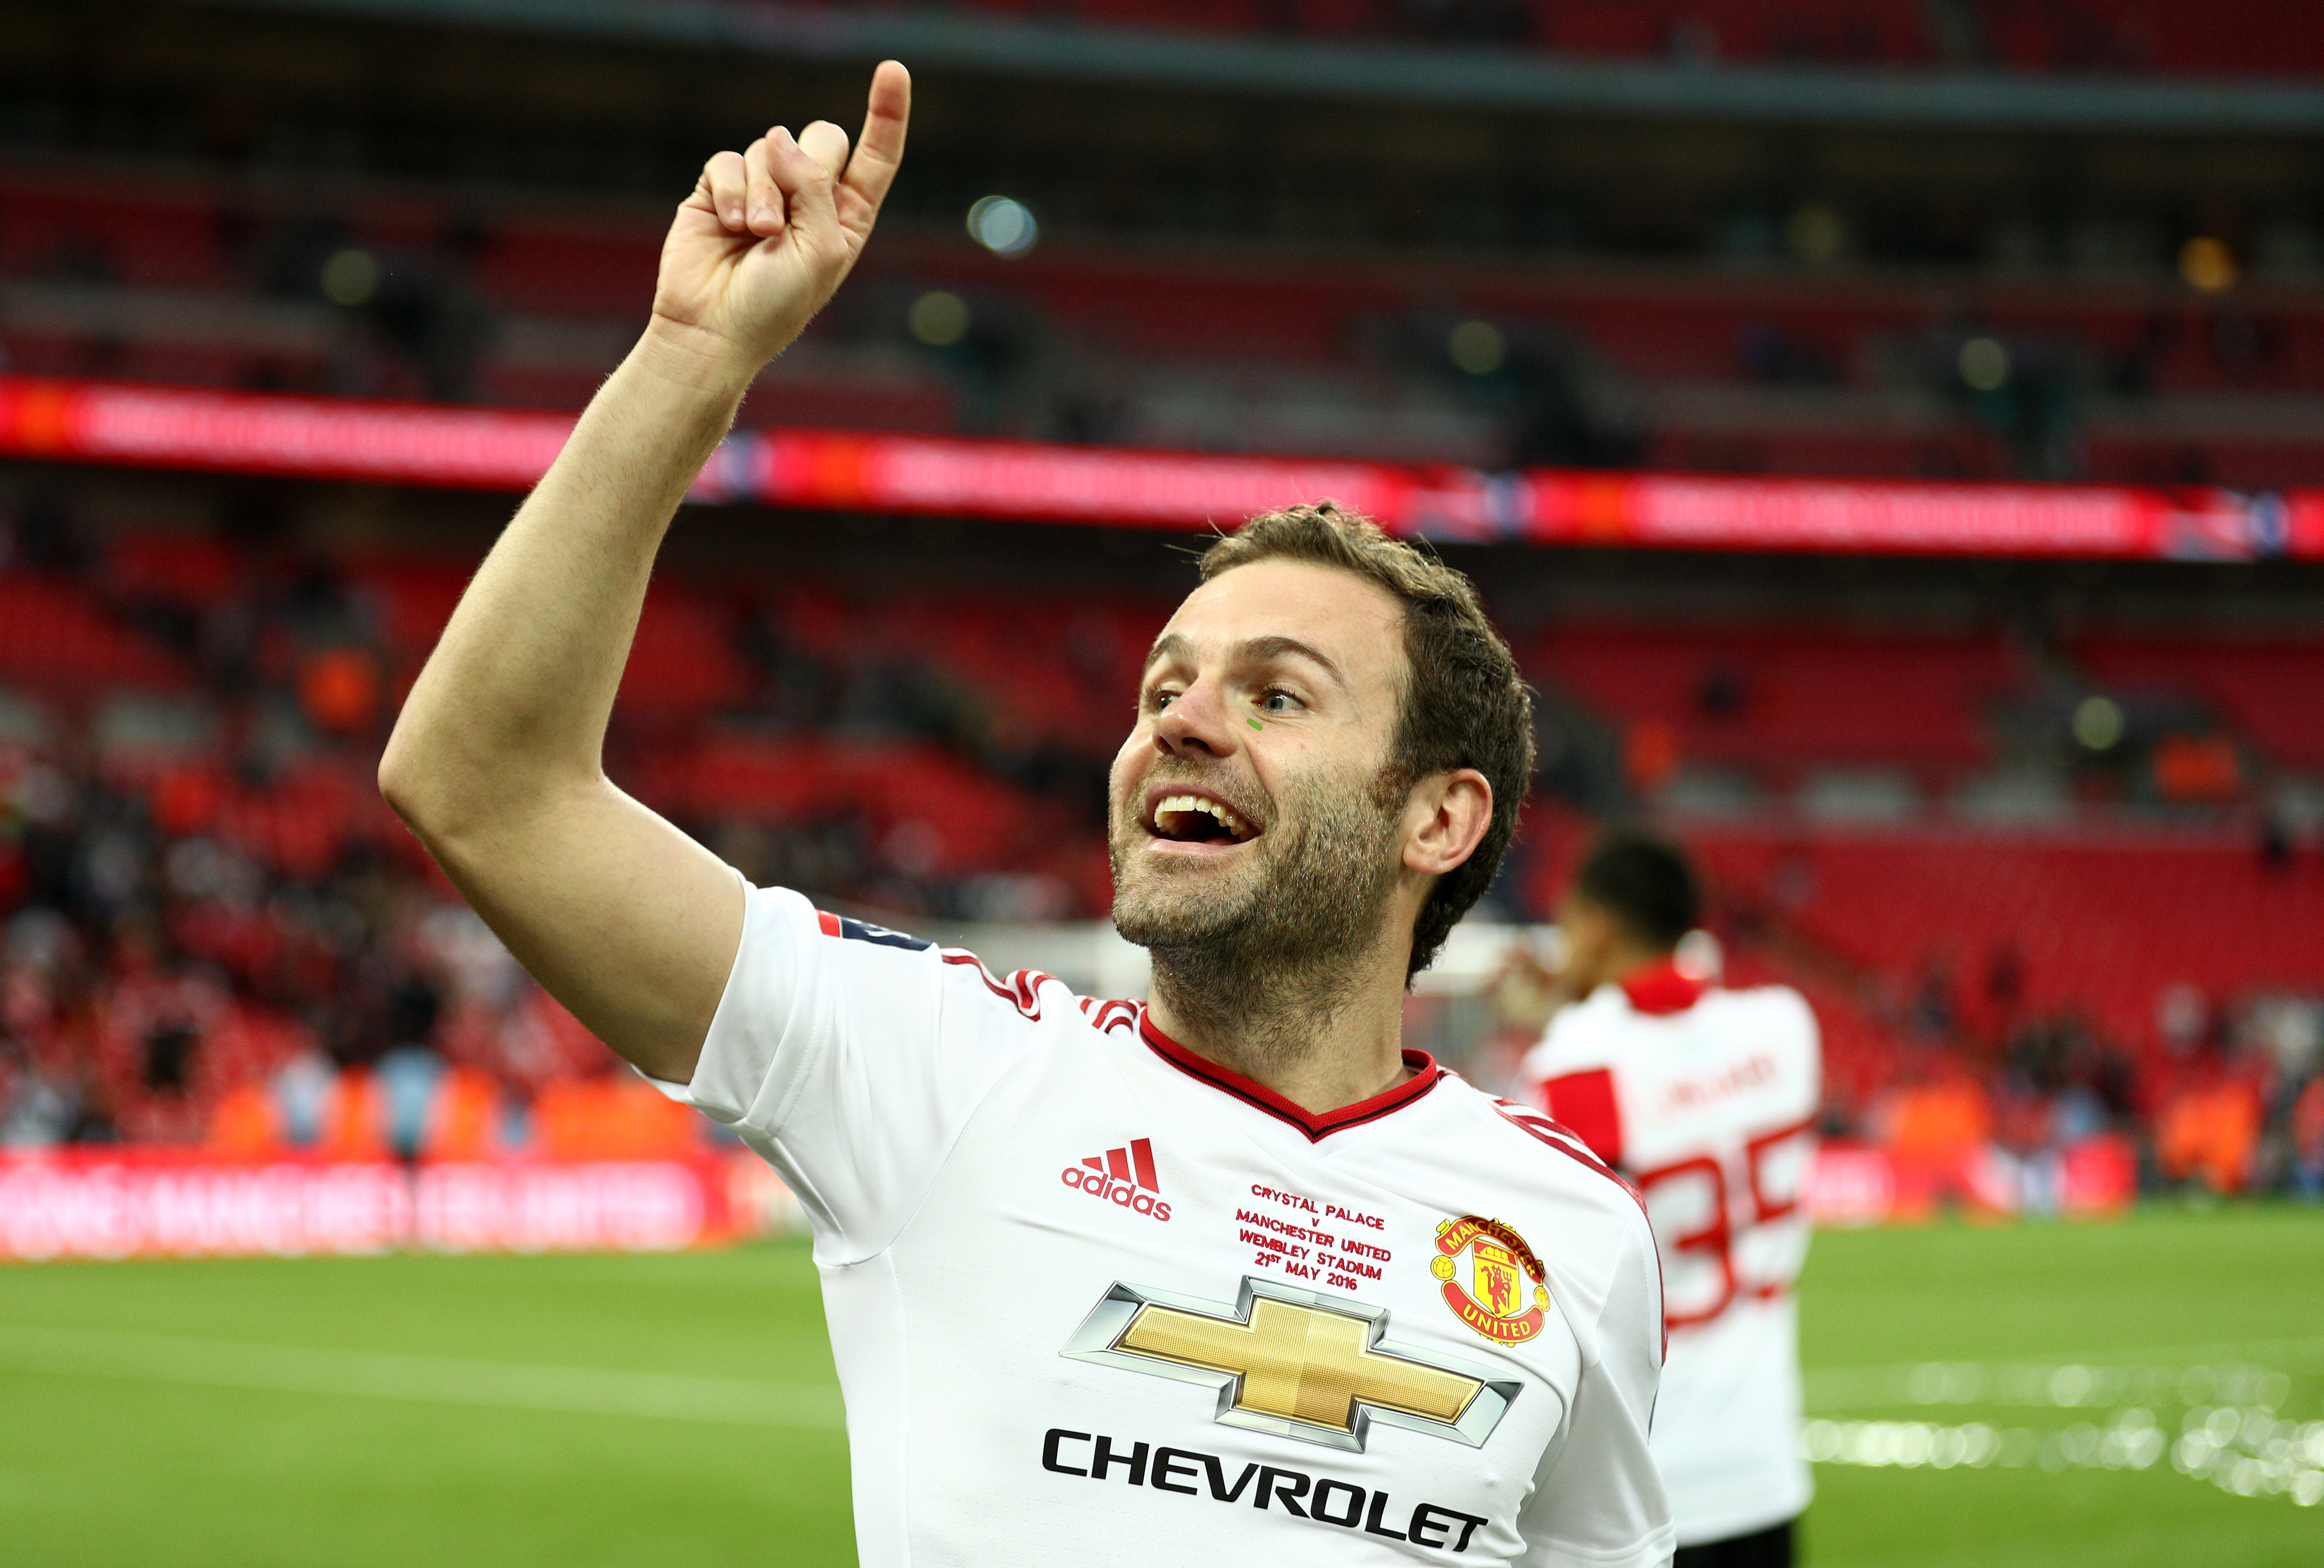 LONDON, ENGLAND - MAY 21:  Juan Mata of Manchester United celebrates victory on the pitch after The Emirates FA Cup Final match between Manchester United and Crystal Palace at Wembley Stadium on May 21, 2016 in London, England.  (Photo by Paul Gilham/Getty Images)